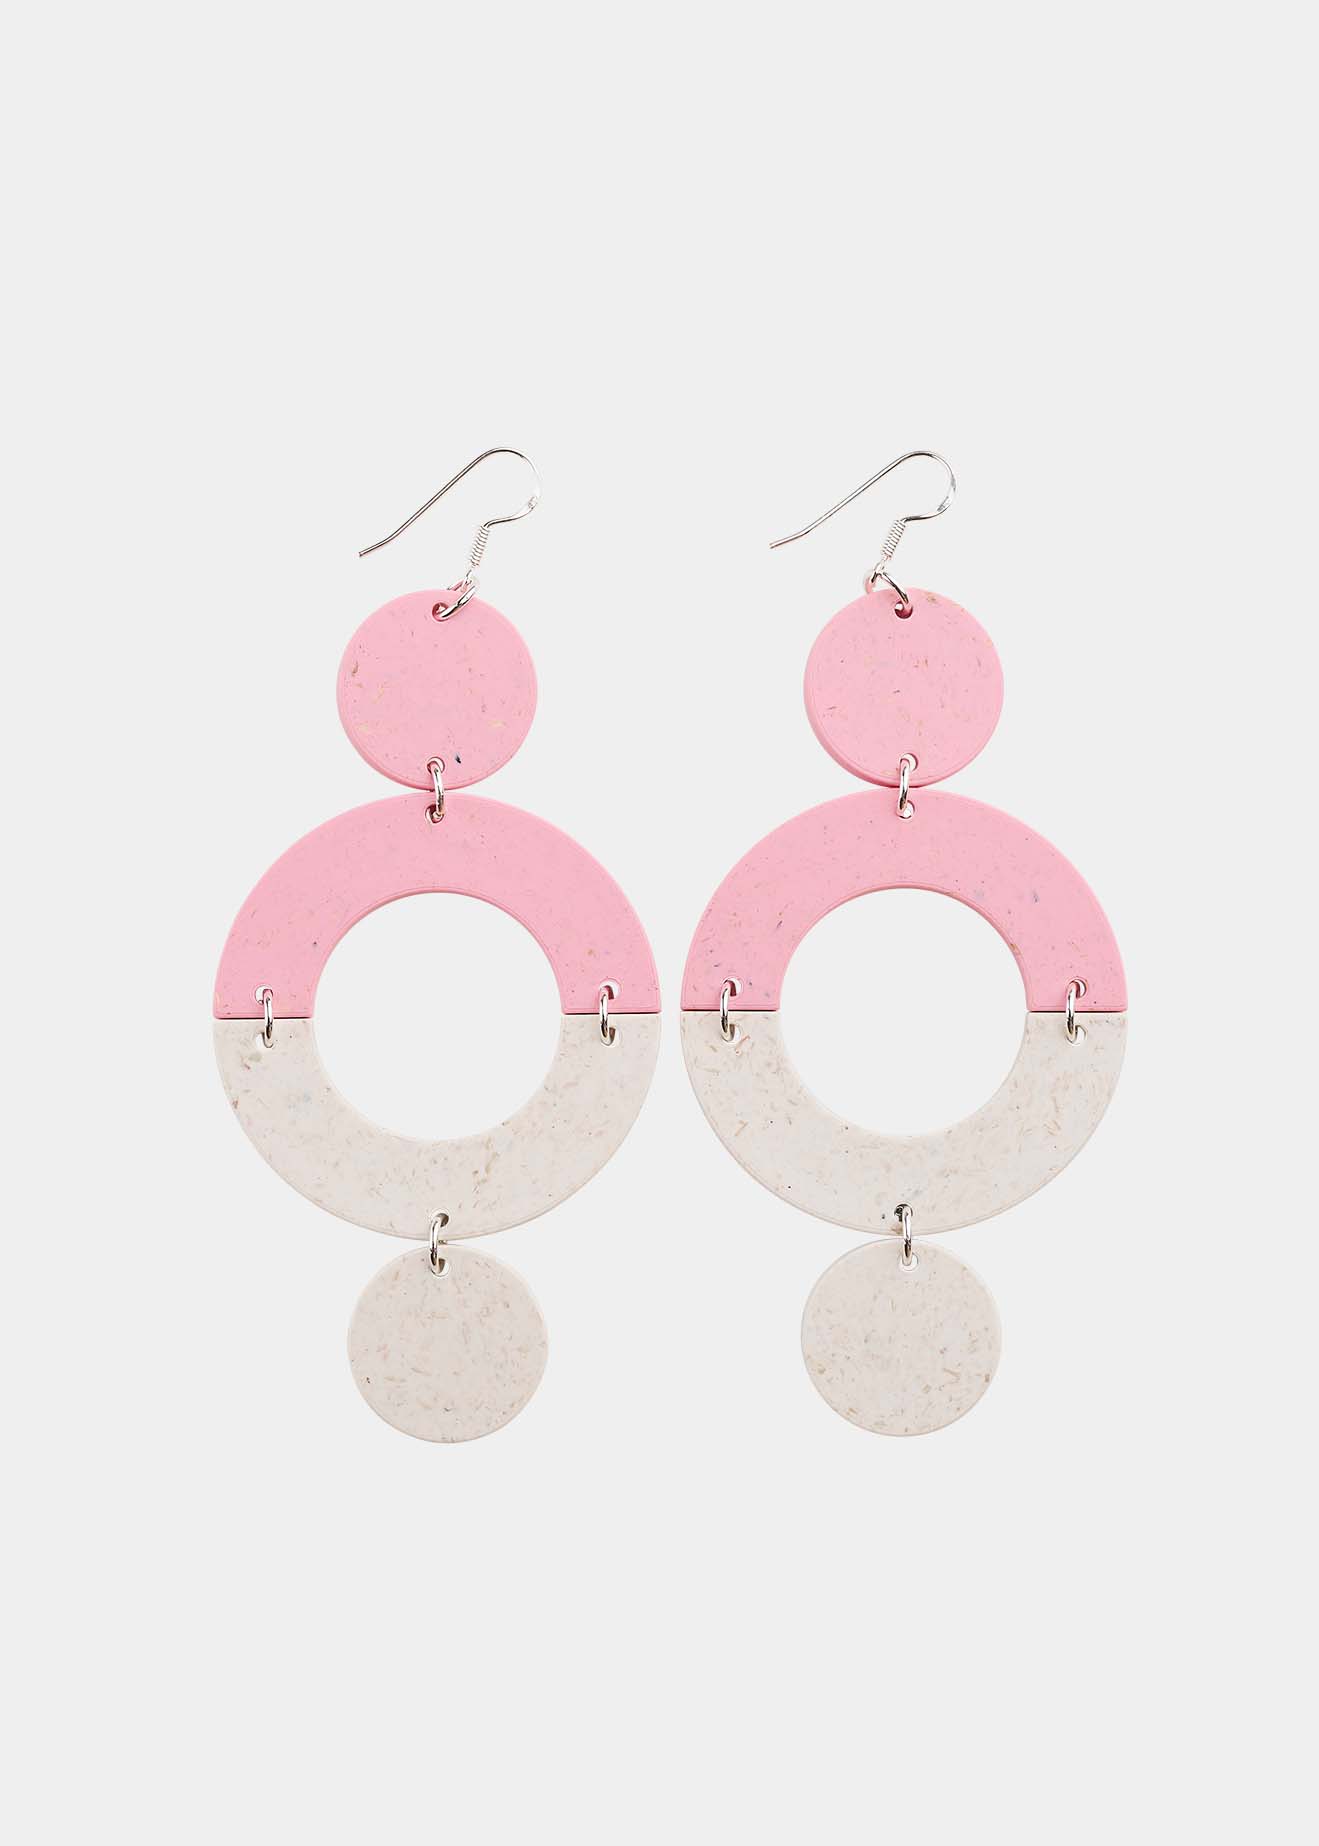 CURVES EARRINGS No.2, Cherry Blossom/First Snow